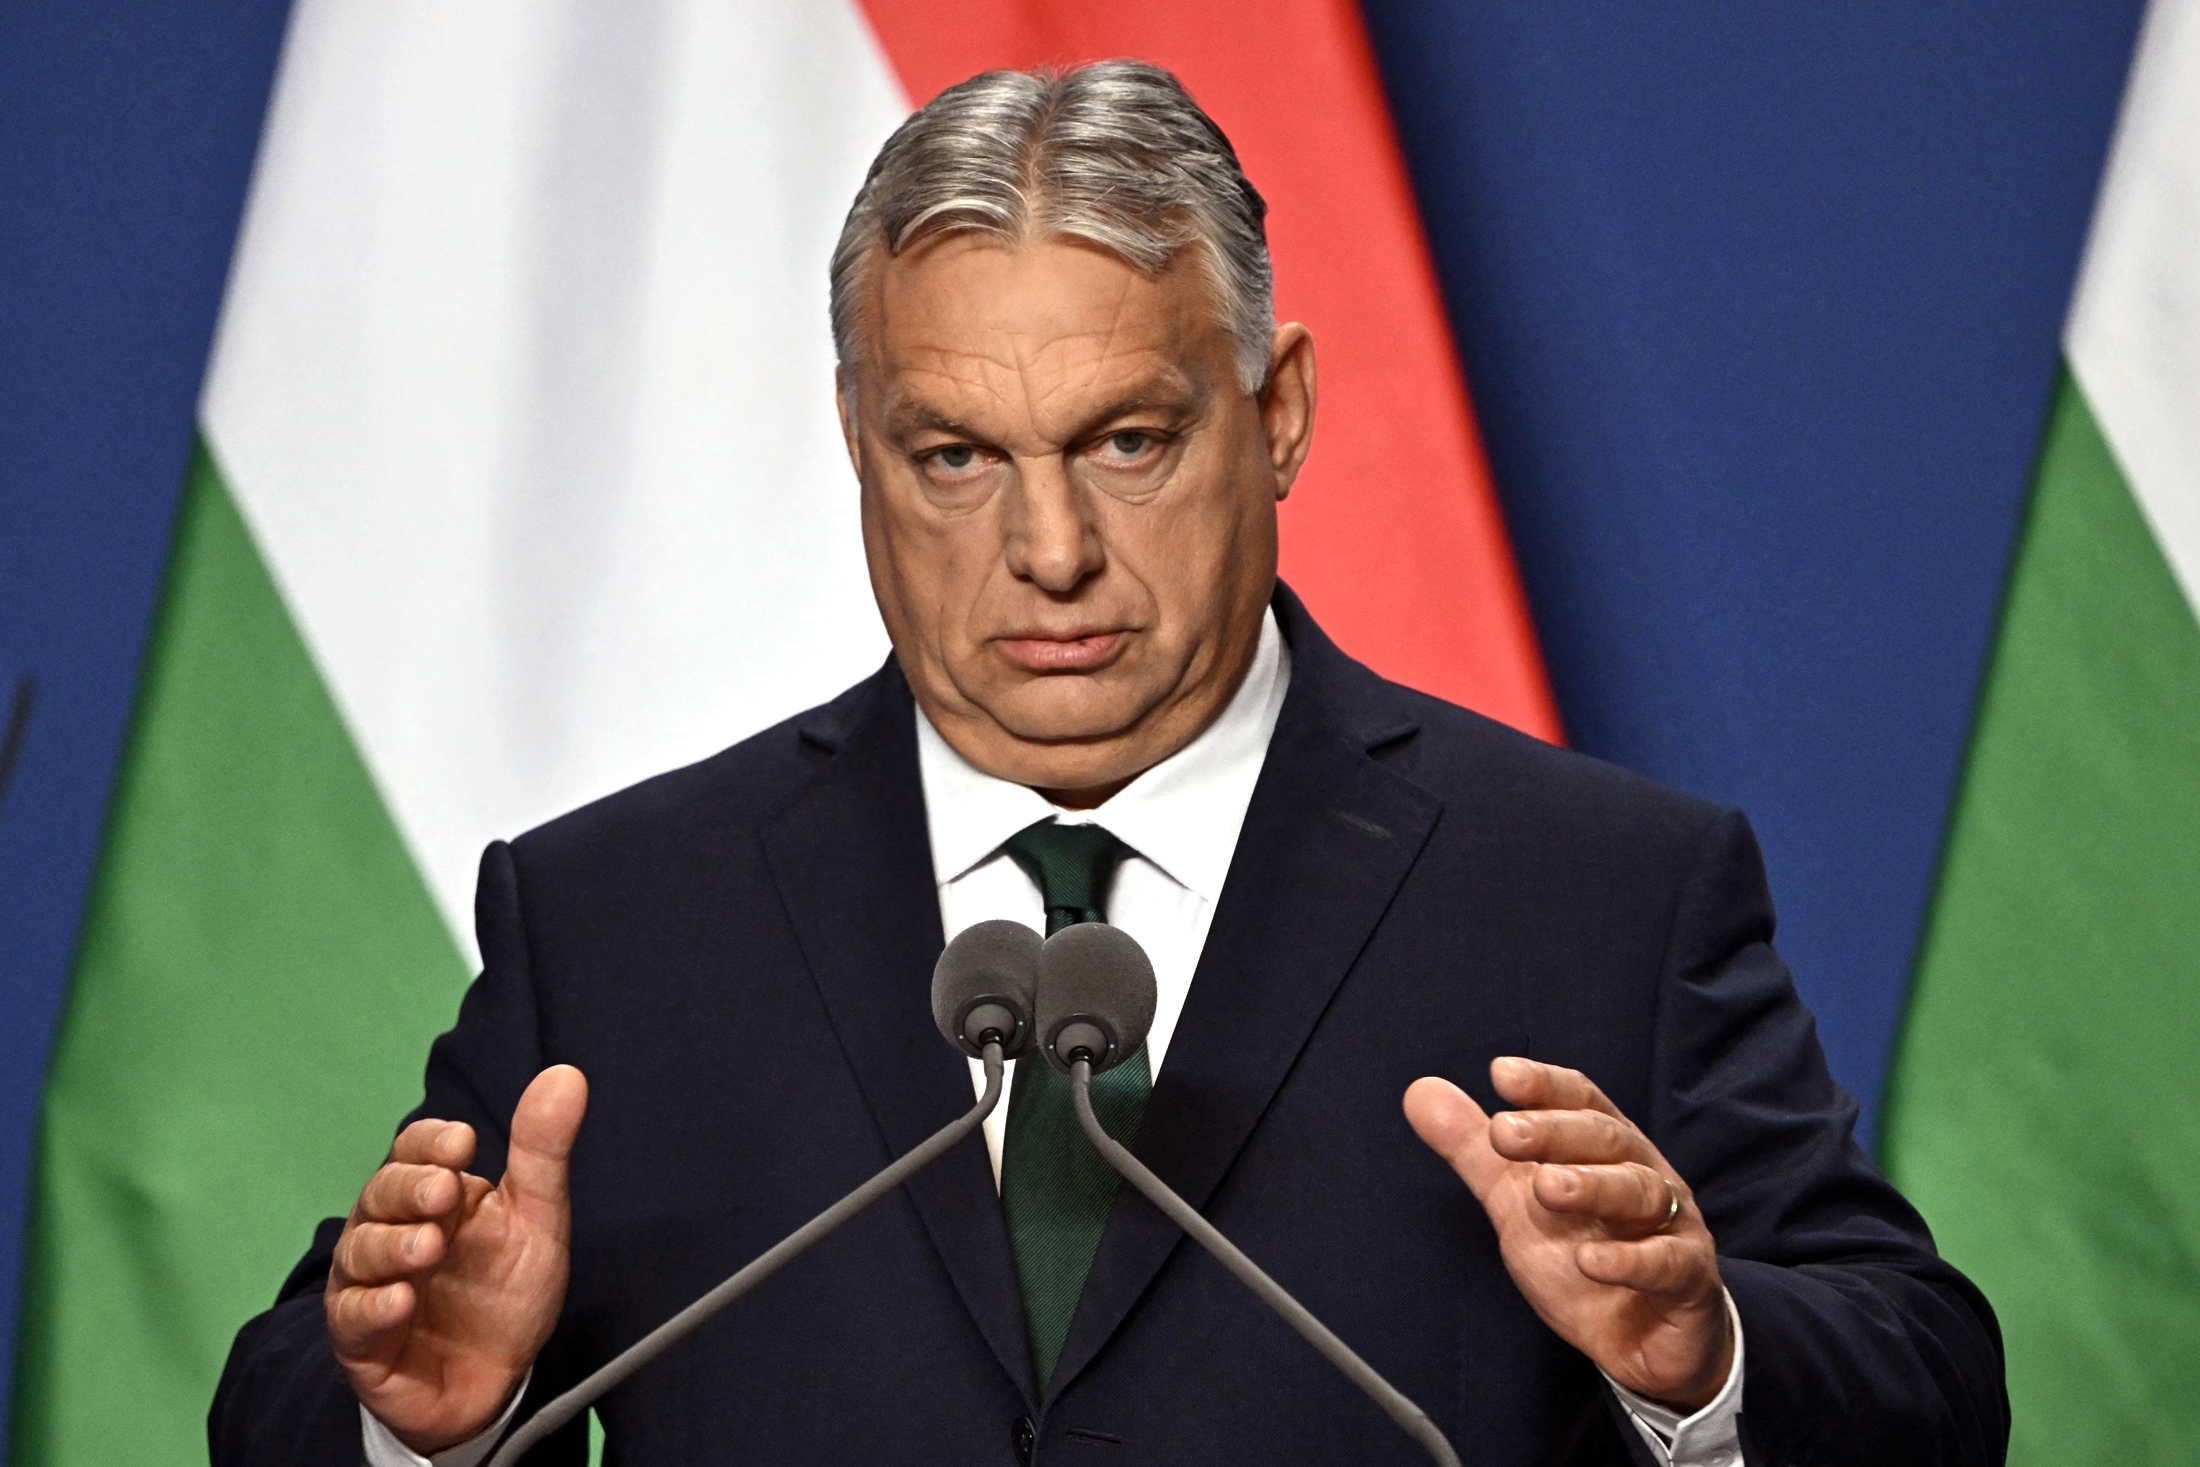 Orban Vows to Avenge EU Ruling, Clouding Hungary's Presidency - Bloomberg